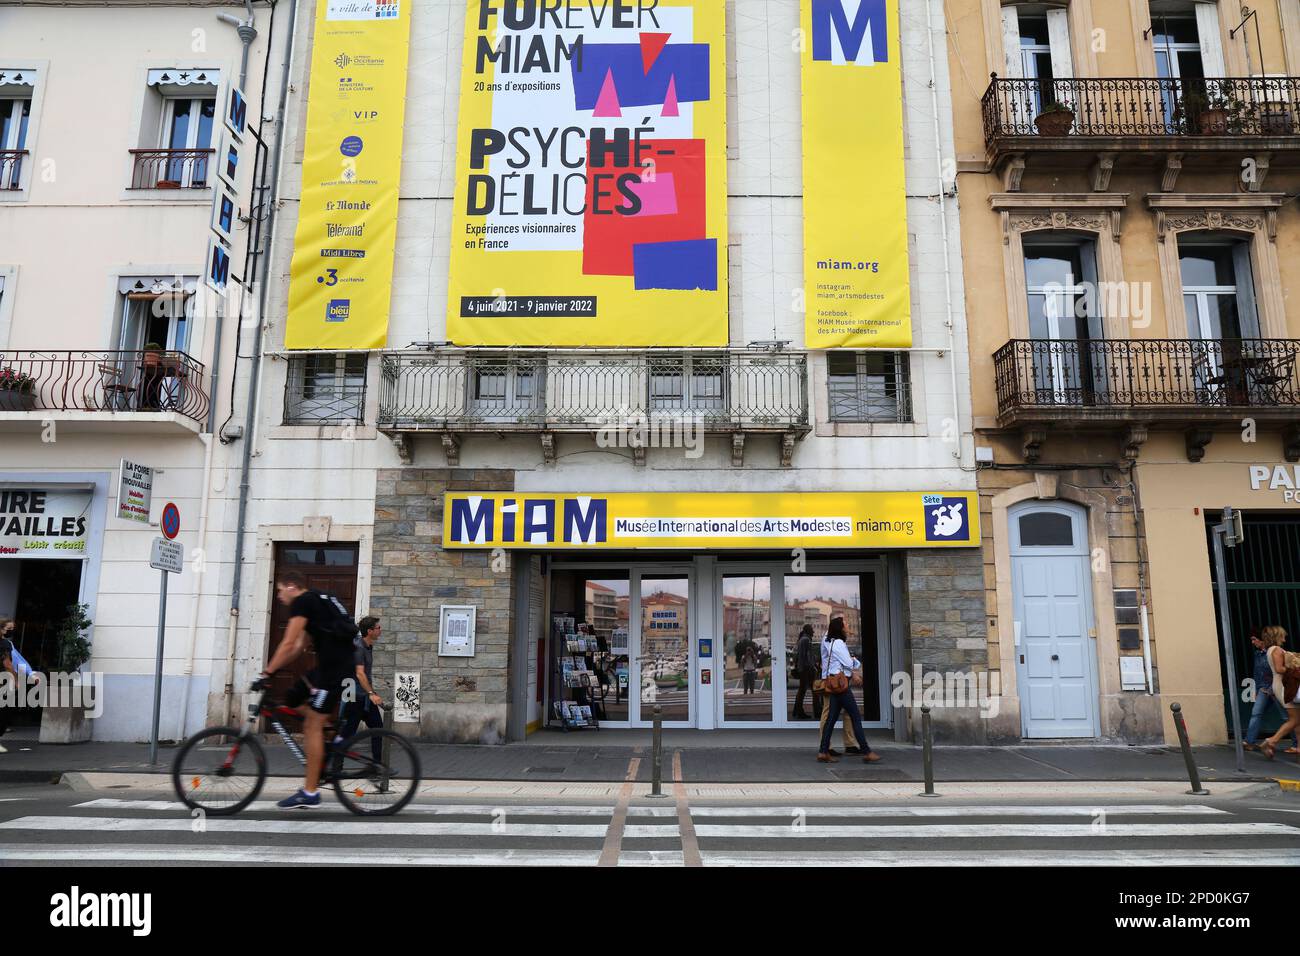 SETE, FRANCE - OCTOBER 2, 2021: International Museum of Modern Arts (MIAM, Musee International de Arts Modernes) in Sete, France. Sete is a famous har Stock Photo